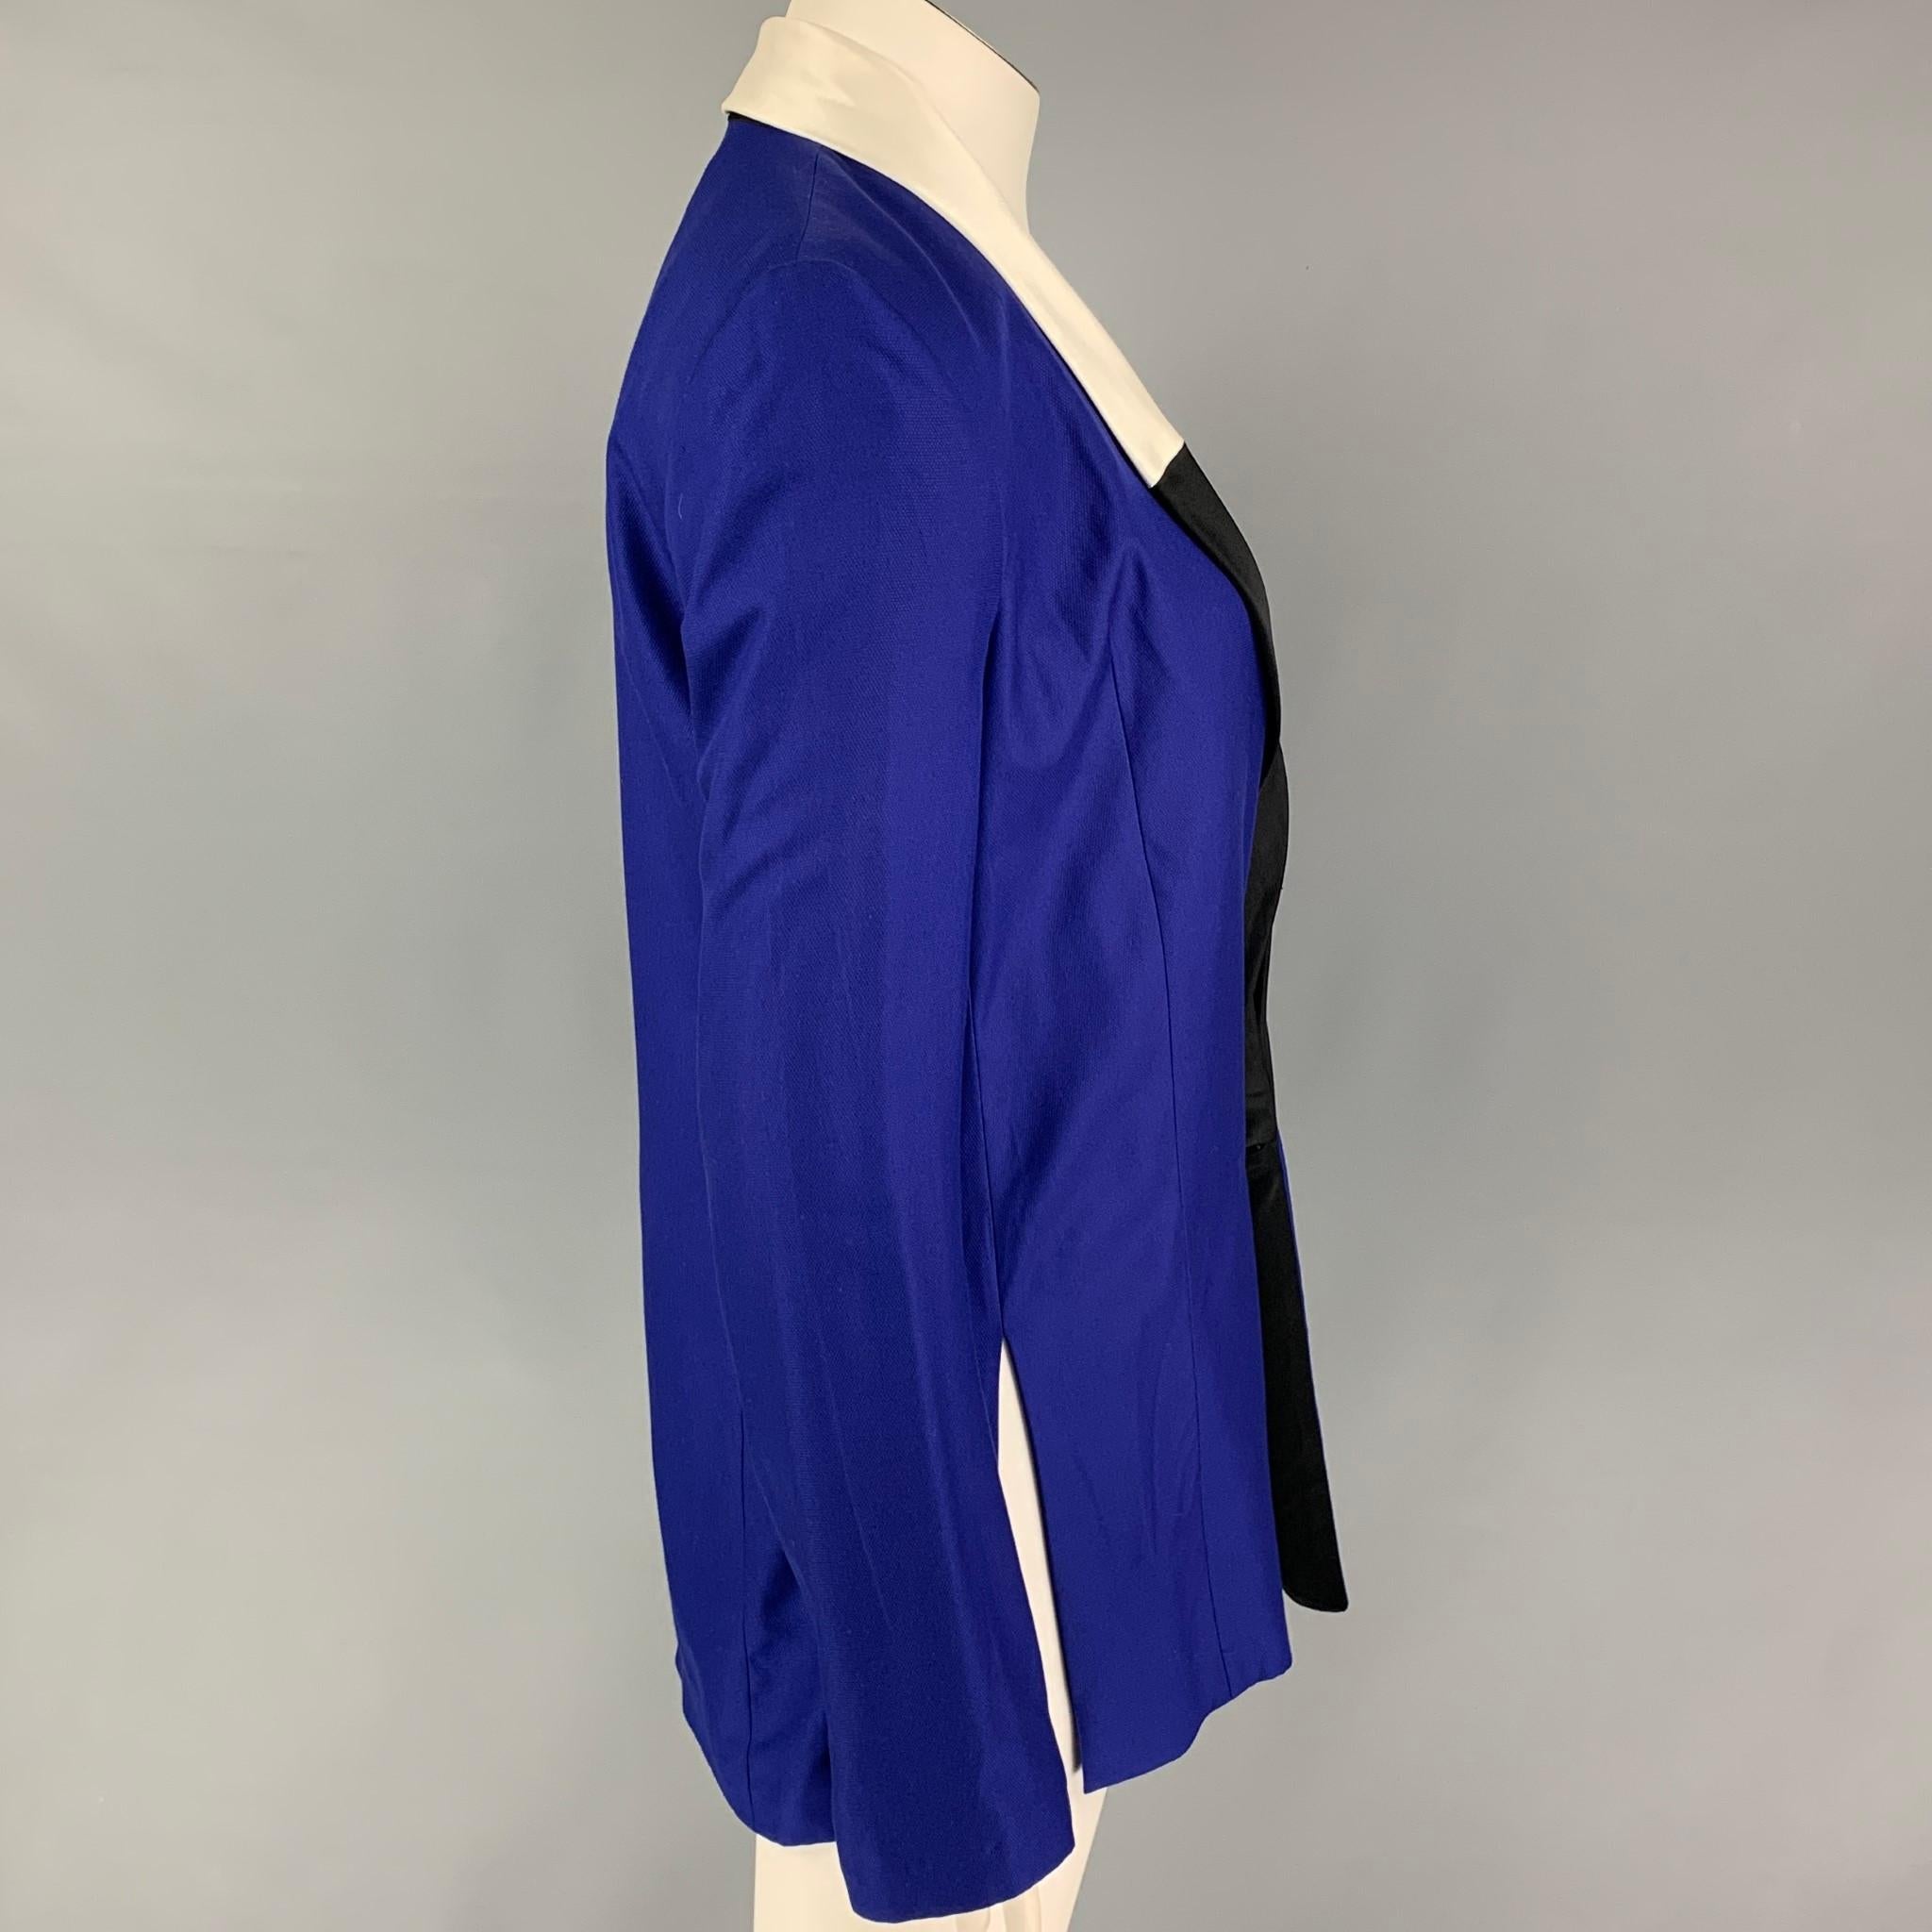 HAIDER ACKERMAN blazer come in a blue silk featuring a black & white color block shawl lapel, side slits, and a hidden button closure. Includes tags. Made in Italy.

Very Good Pre-Owned Condition.
Marked: 40

Measurements:

Shoulder: 17 in.
Bust: 40